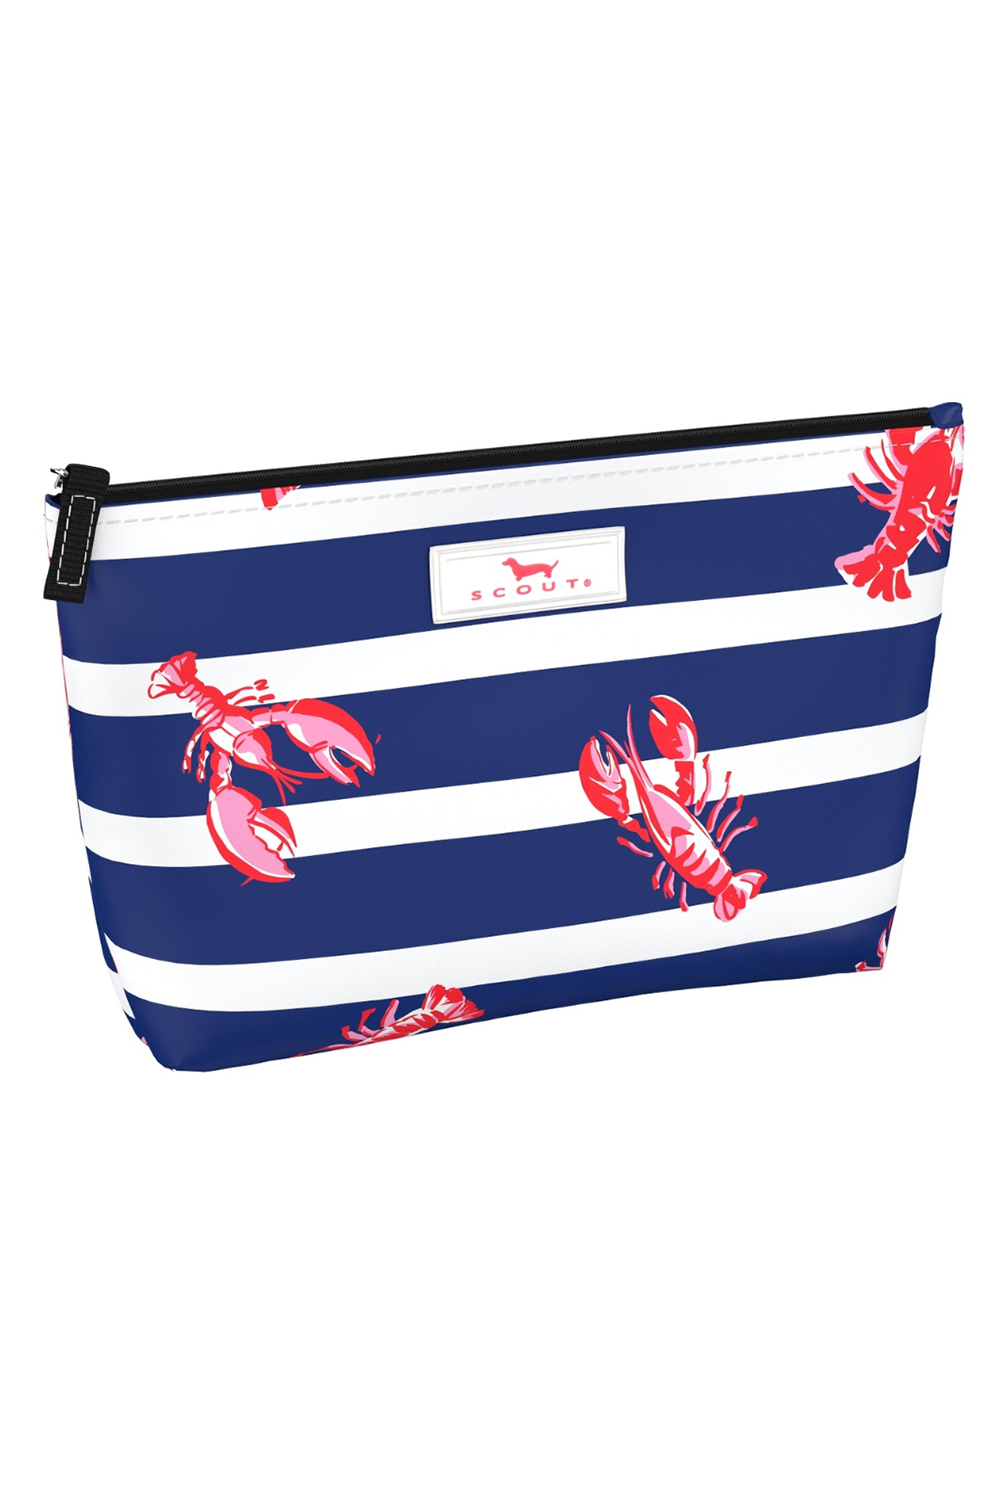 Twiggy Cosmetic Bag - "Catch of the Day" SUM24